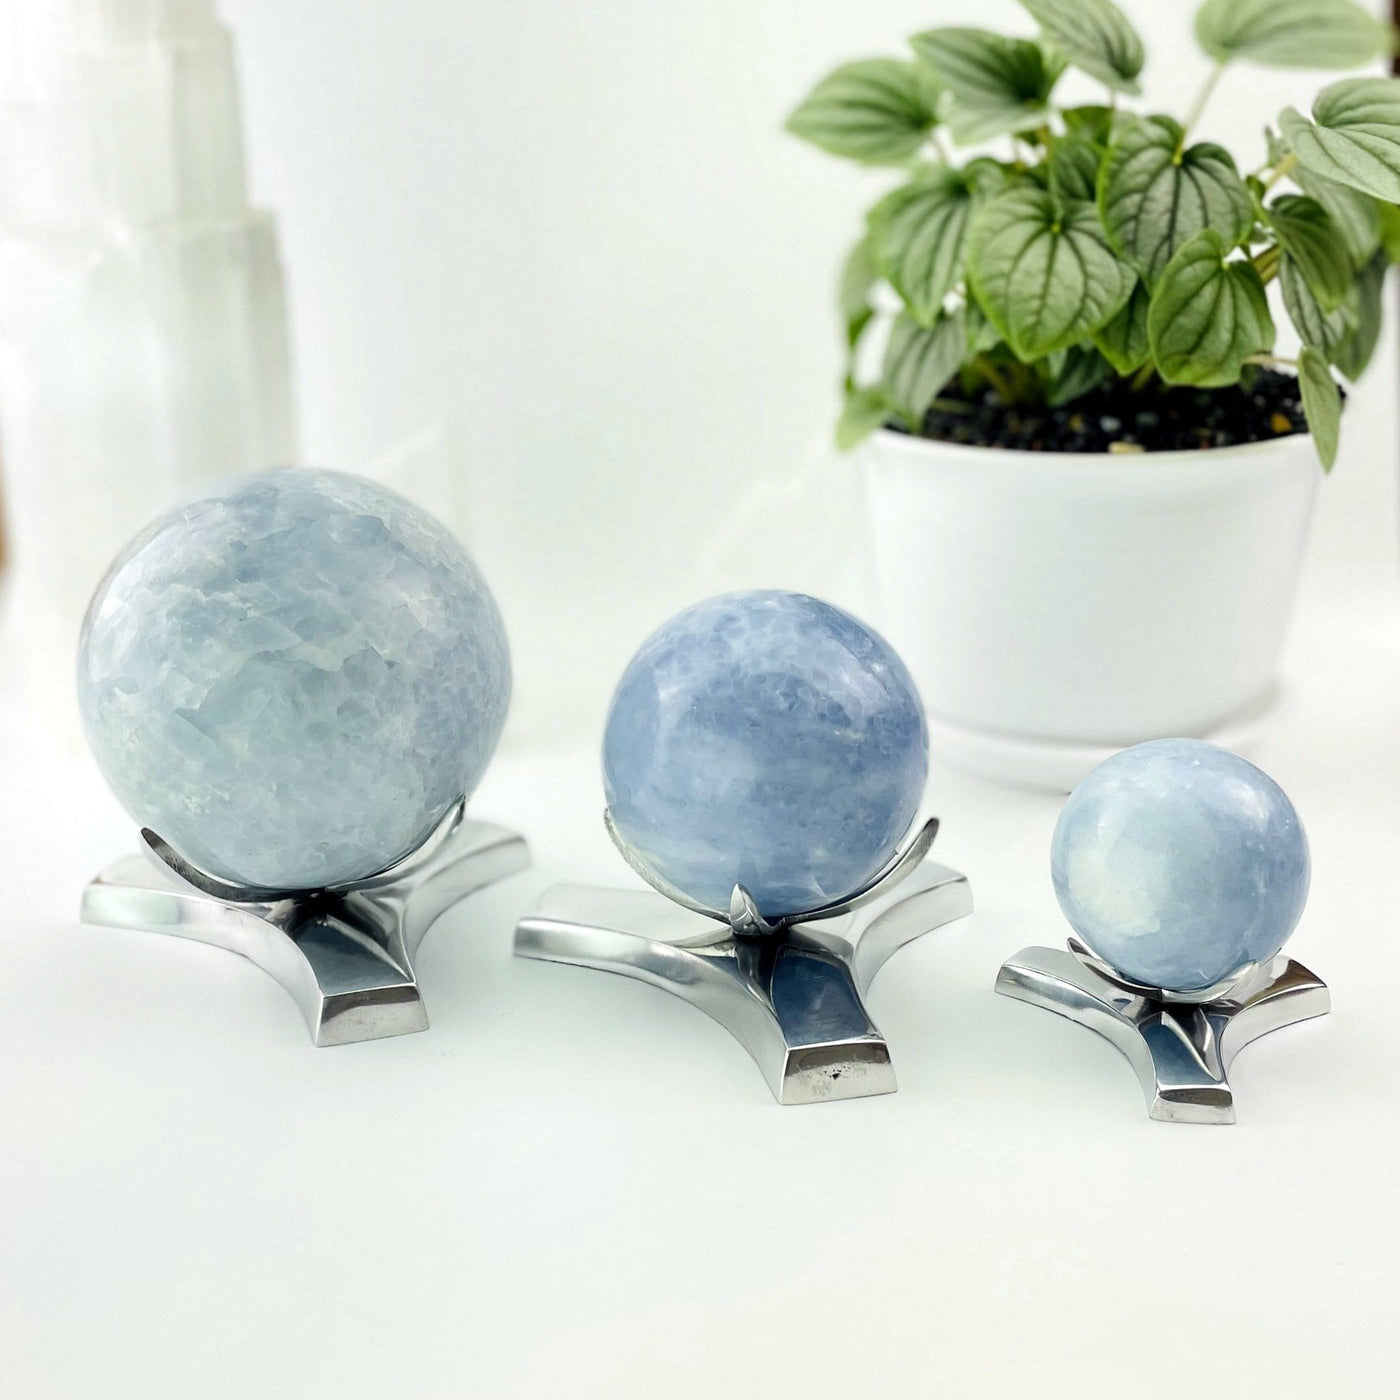 All three size of sphere stands made up as shorter stands with calcite spheres on them to demonstrate the type of crystals they hold.